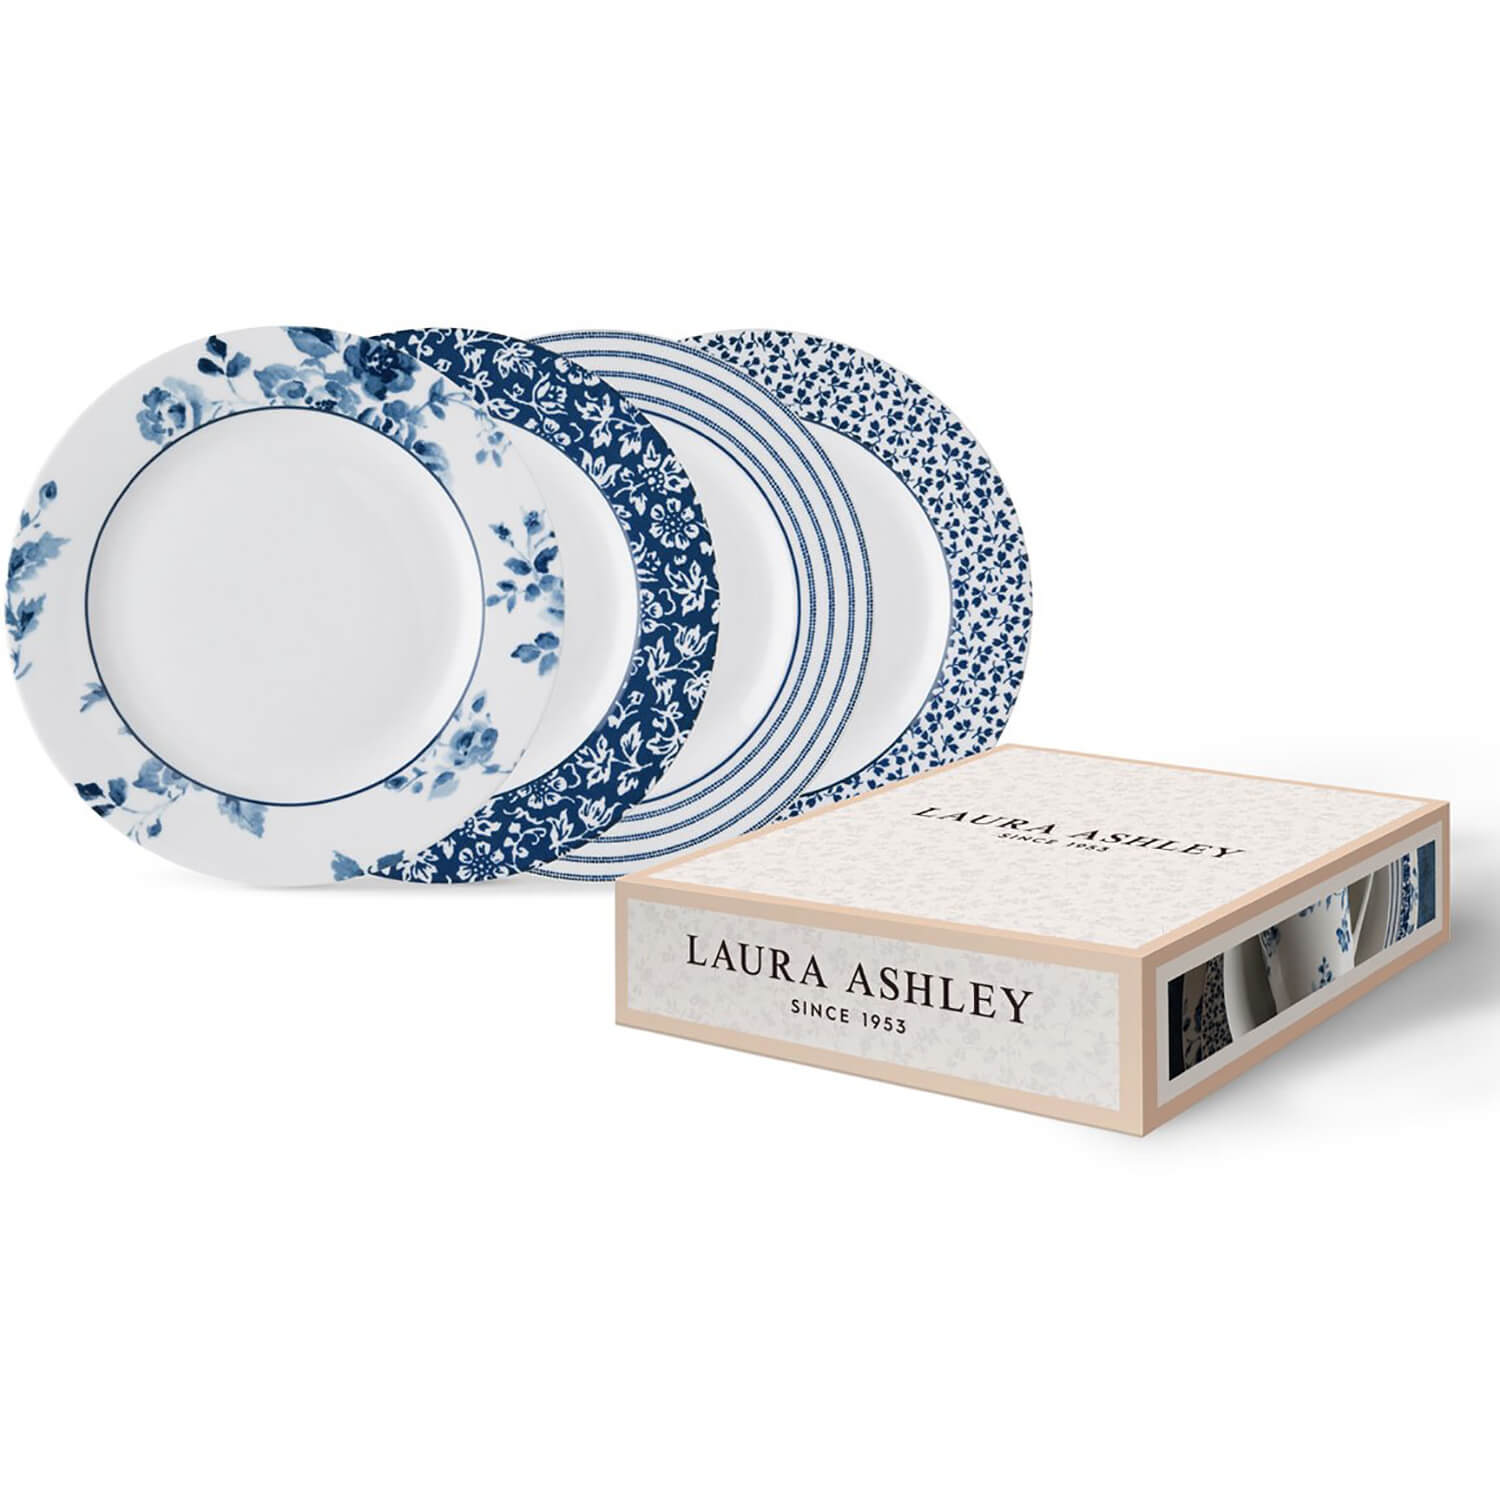 Laura Ashley Blueprint Collectables Set of 4 Plates - Multi 2 Shaws Department Stores